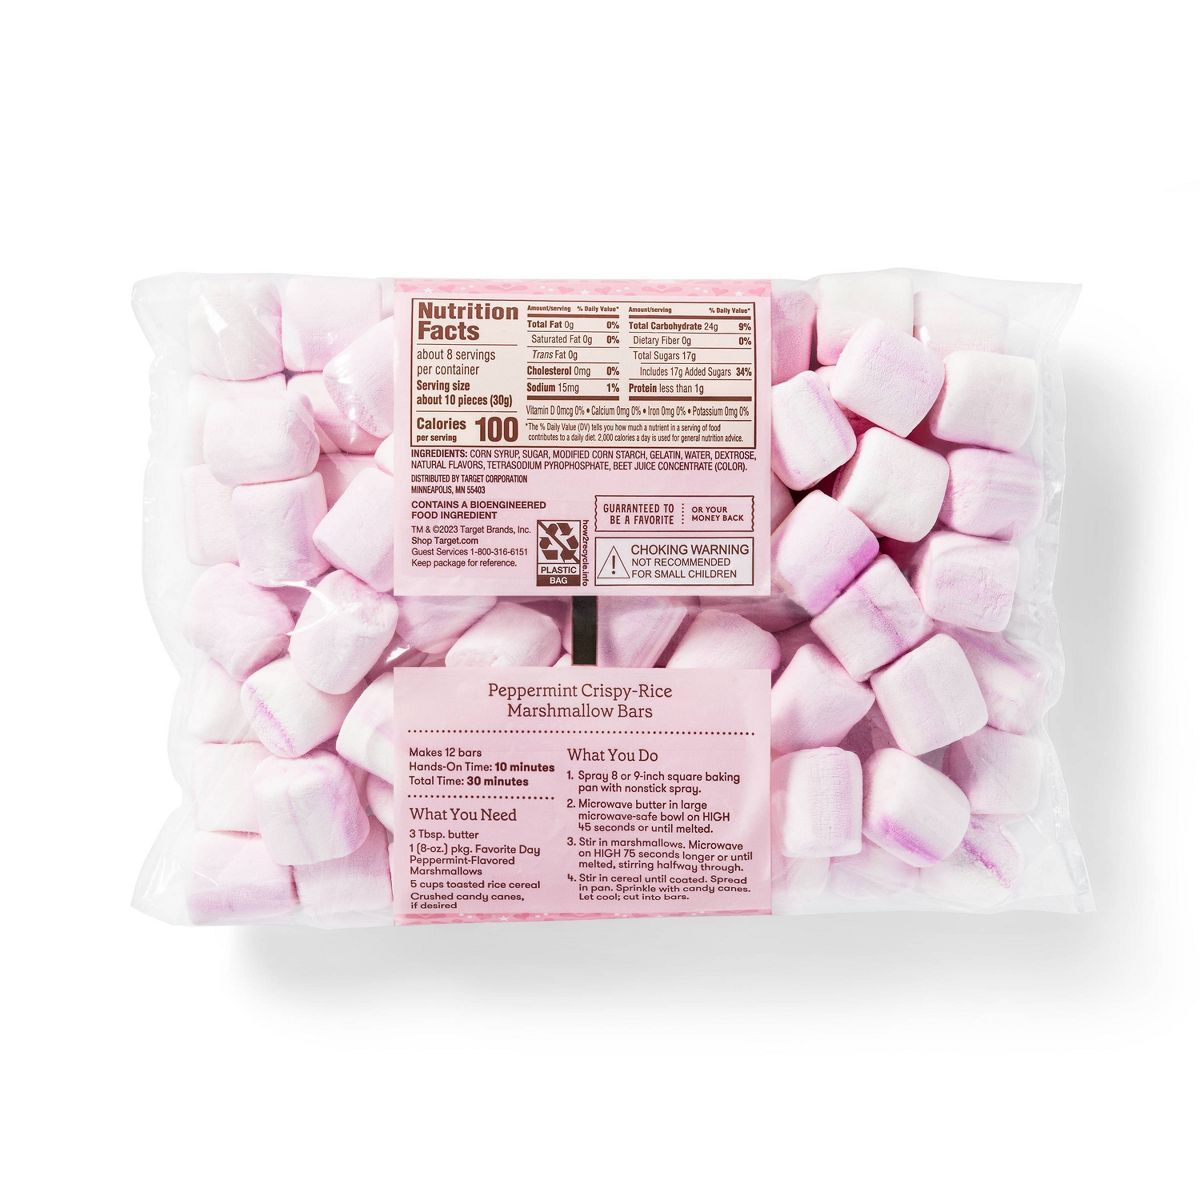 Holiday Peppermint-Flavored Marshmallows - 8oz - Favorite Day™ | Target